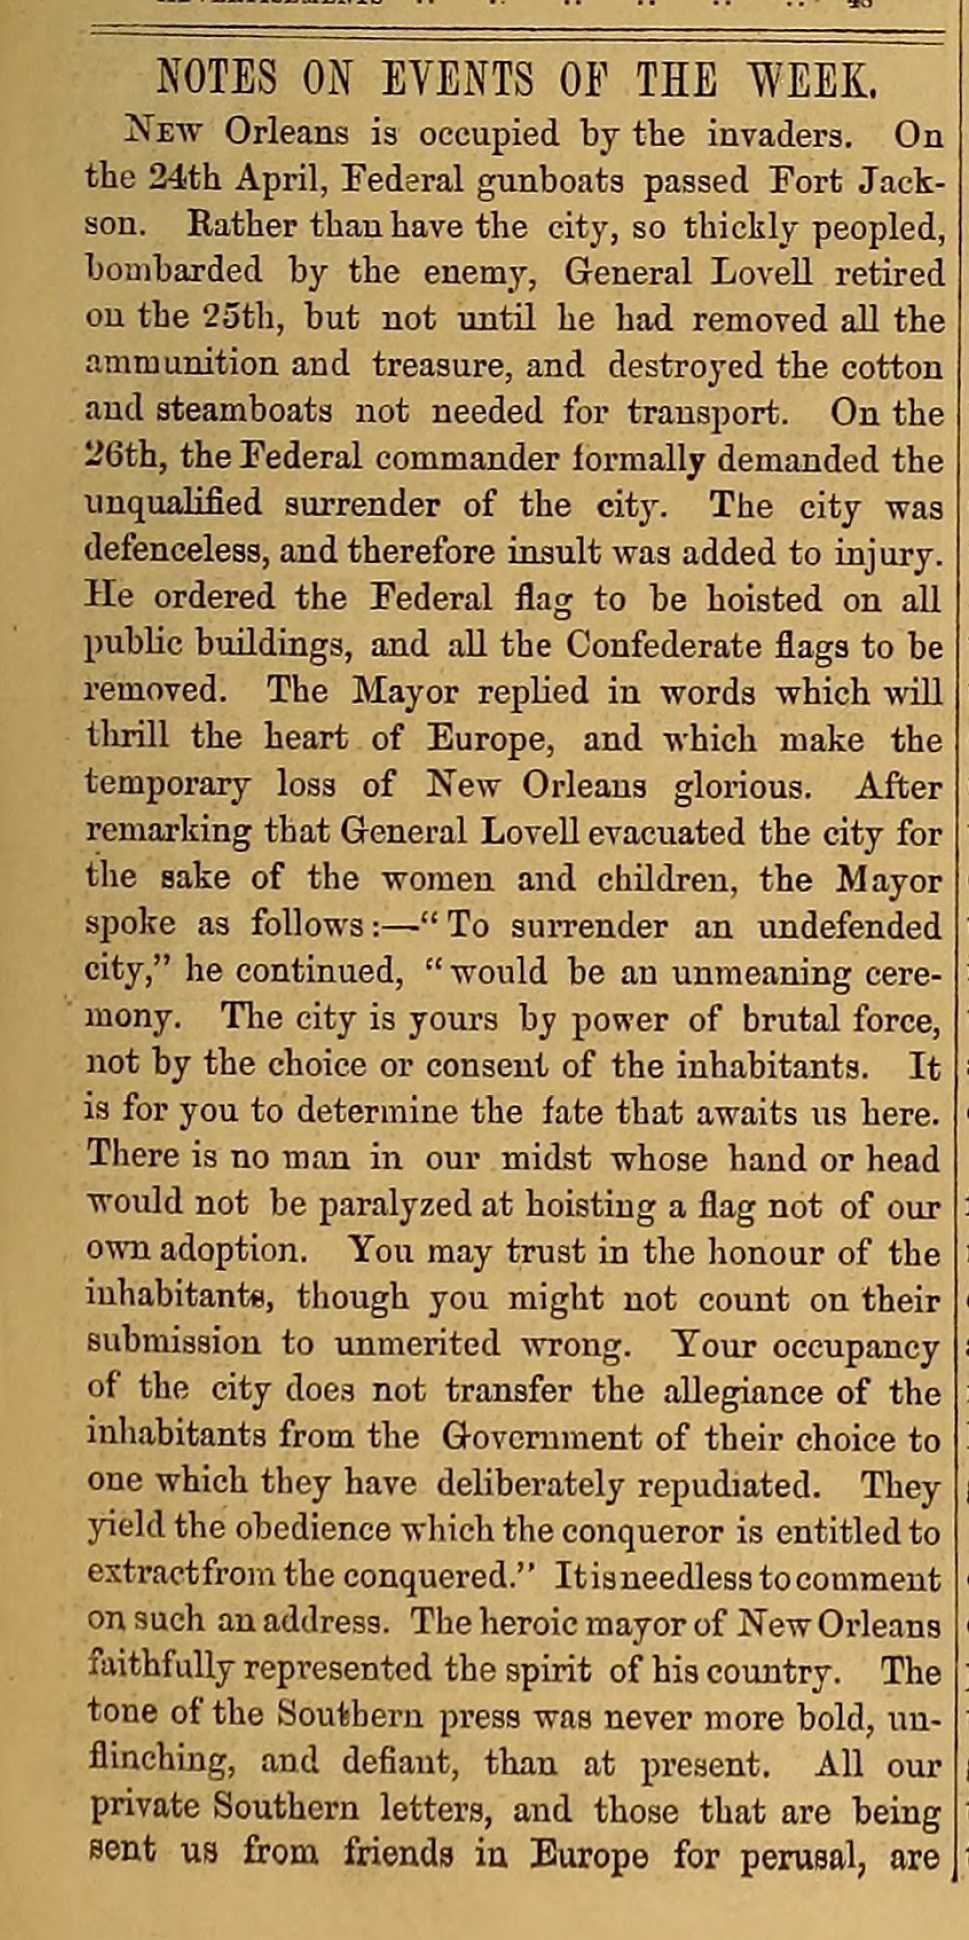 Article on the Union capture of New Orleans from the May 15, 1862 issue of The Index